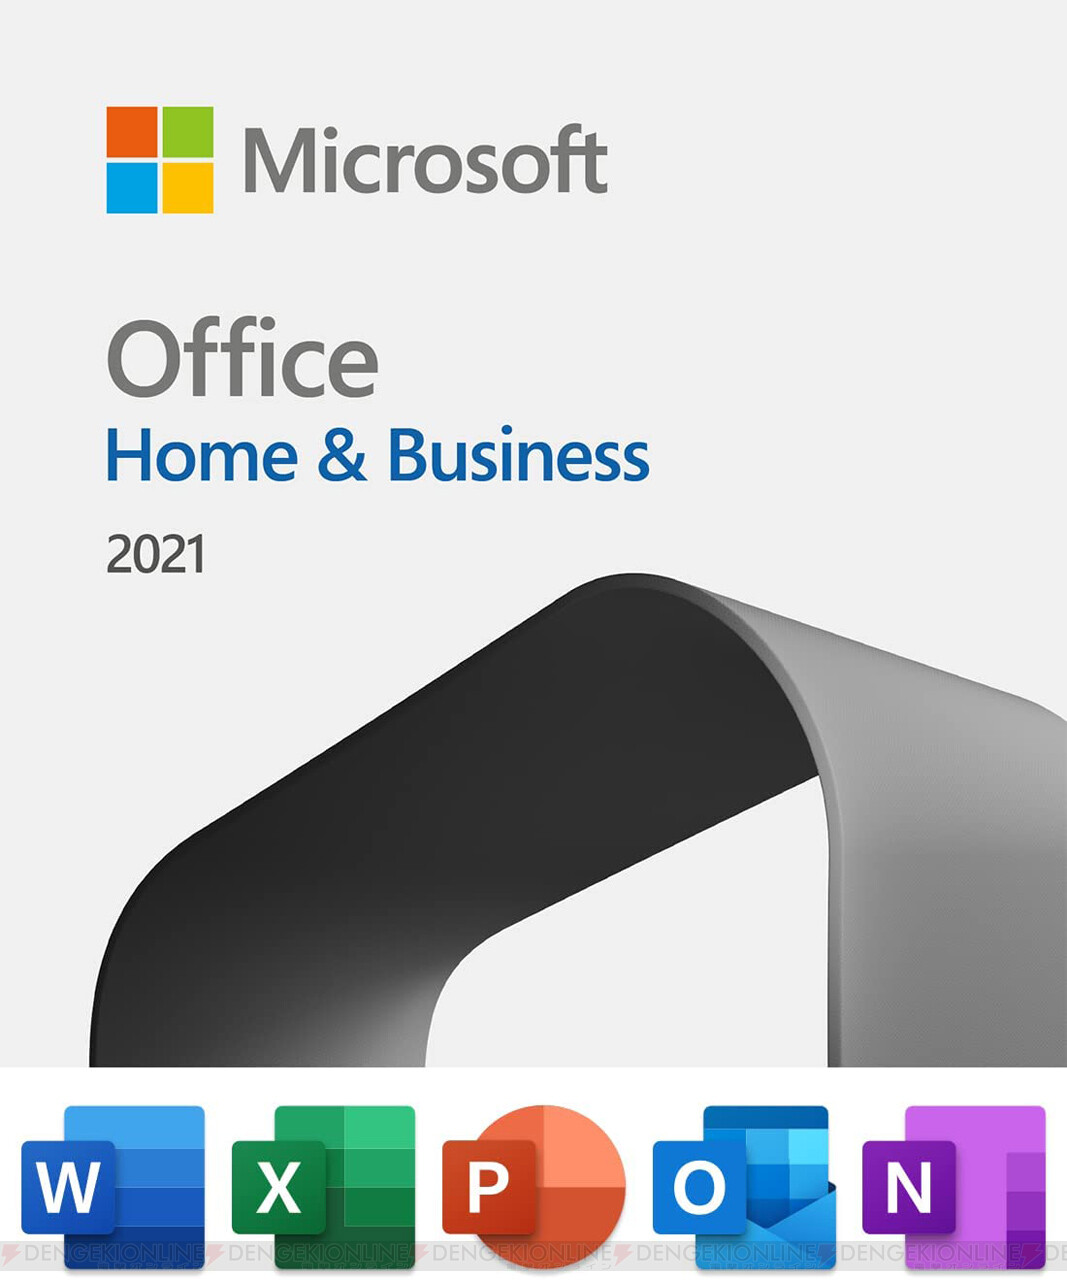 Office Home ＆ Business 2021